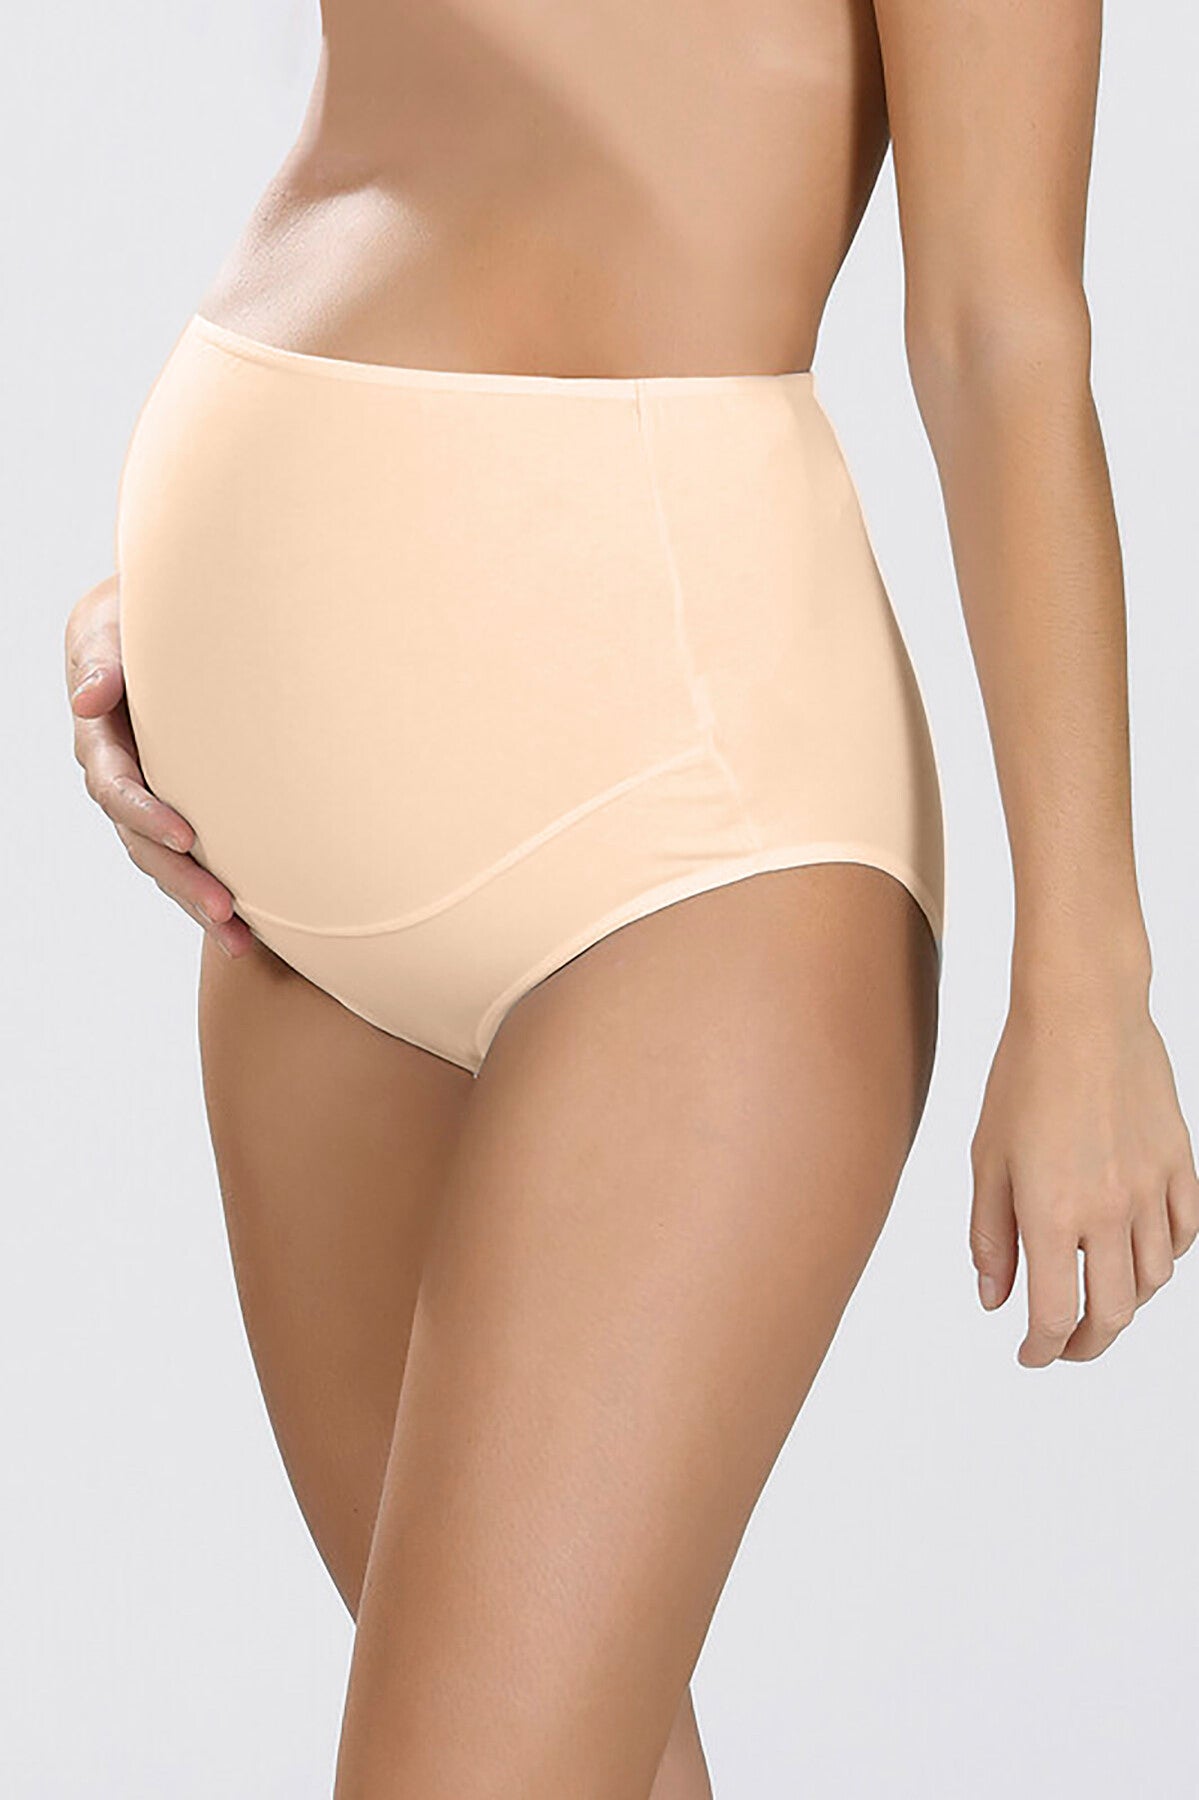 Shopymommy - 2-Pack Cotton Maternity Panties Skin - 540